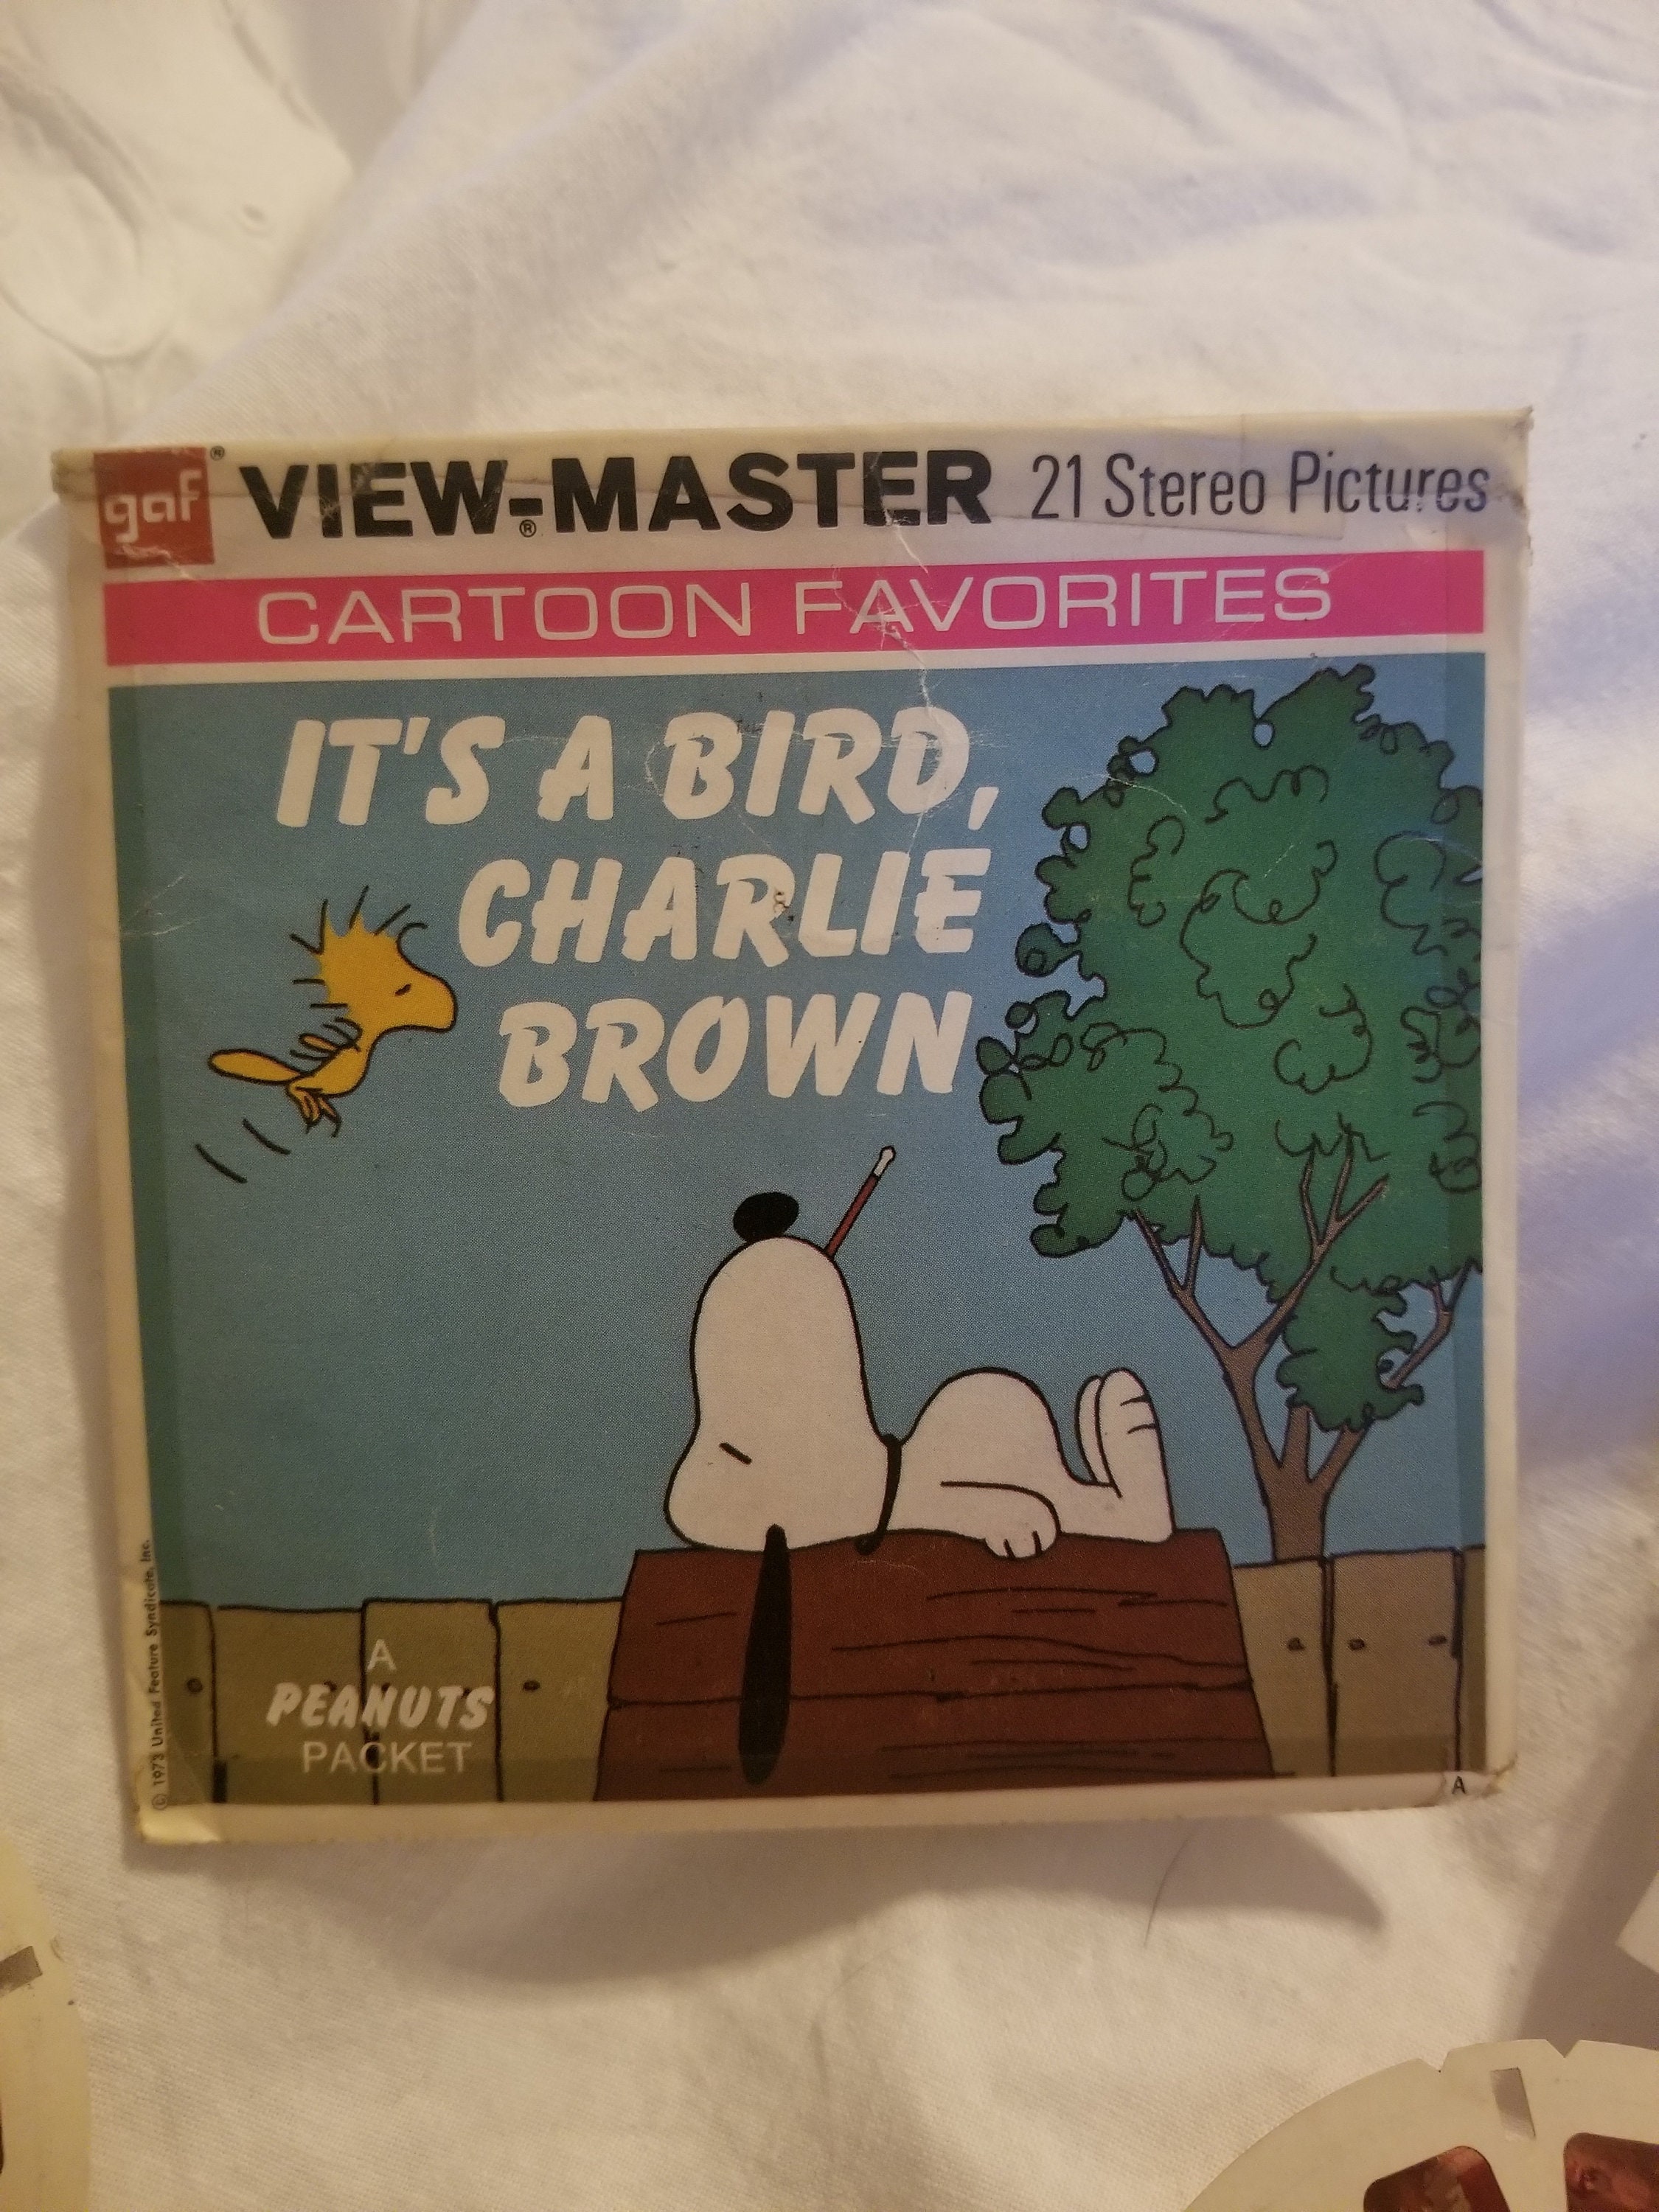 Was the Viewmaster a precursor to the VCR? – Trees & Flowers & Birds!